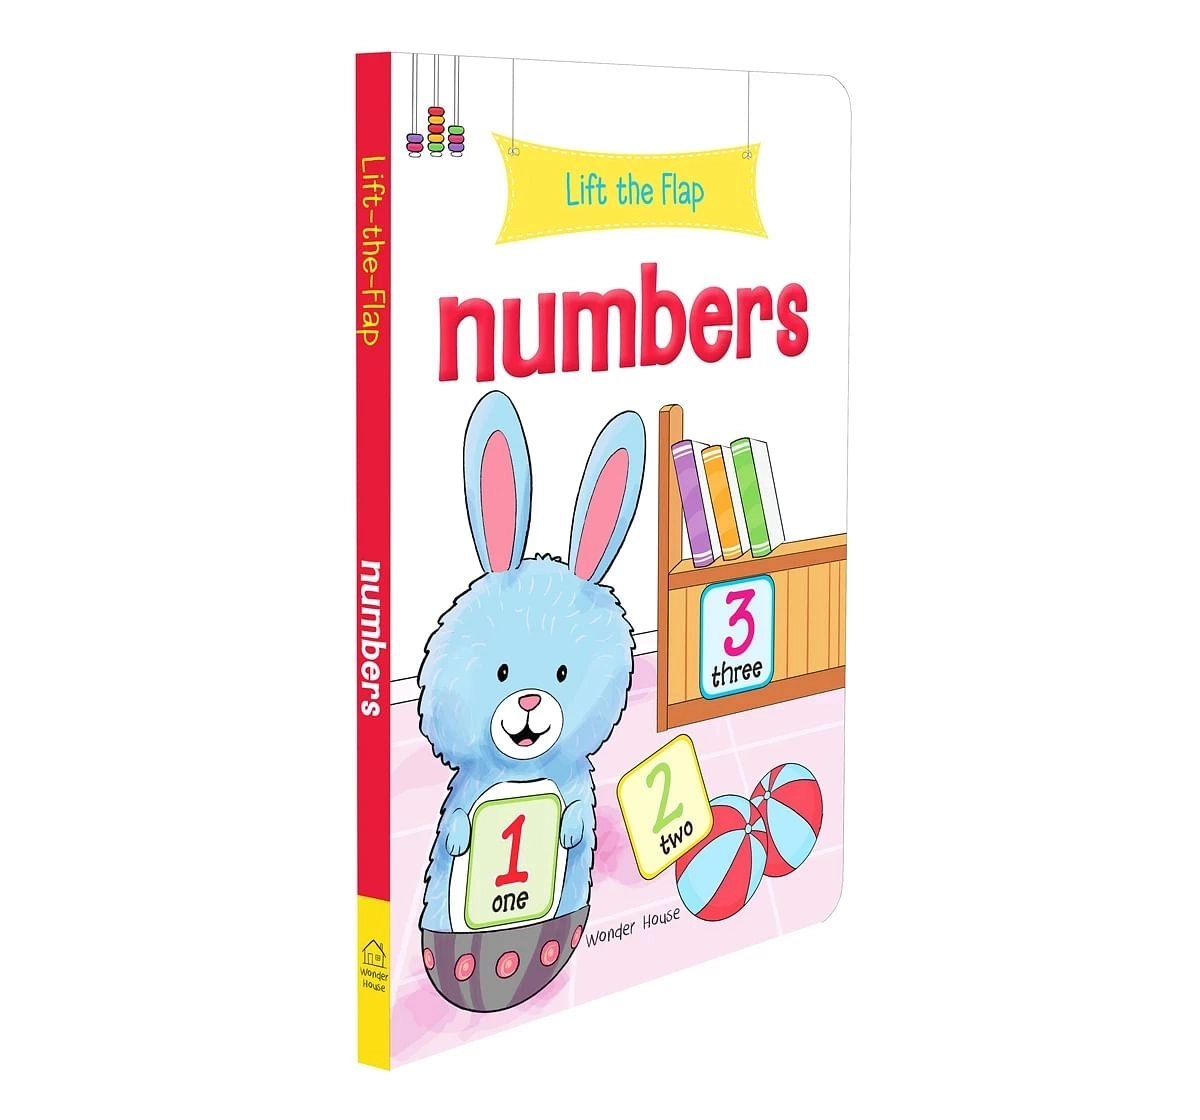 Wonder House Books Lift the Flap Numbers Early Learning Novelty Board Book for kids 0M+, Multicolour